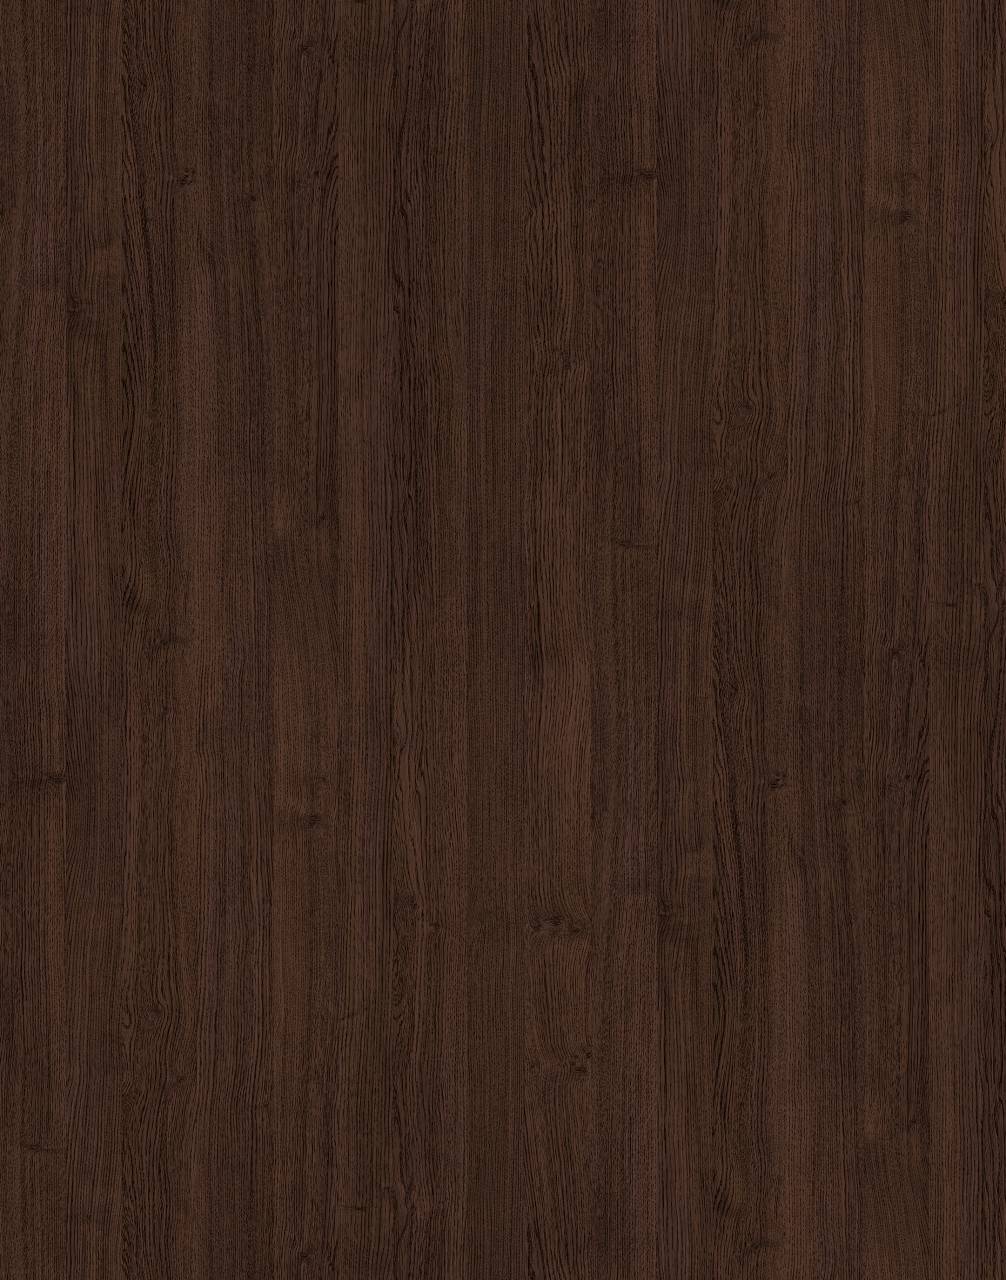 Wenge BS HPL with rich, dark wood grain pattern for an elegant and textured look.